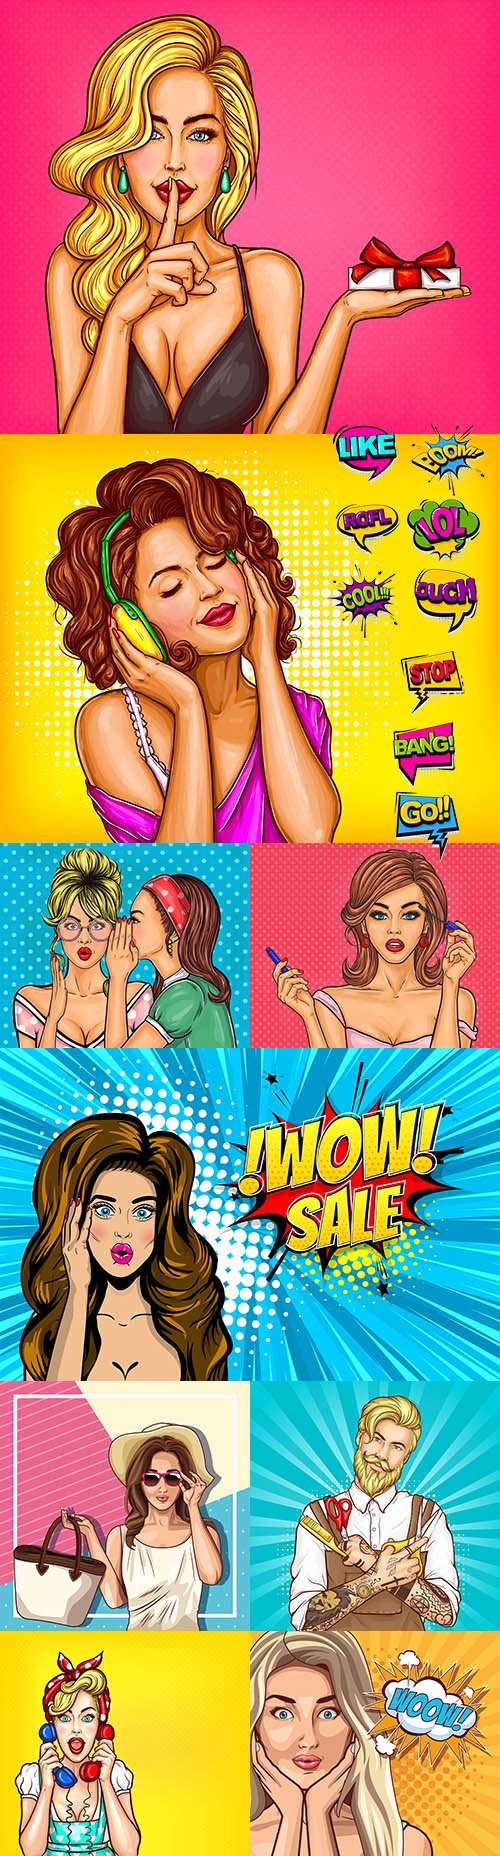 Cute girls with accessories pop art illustration style